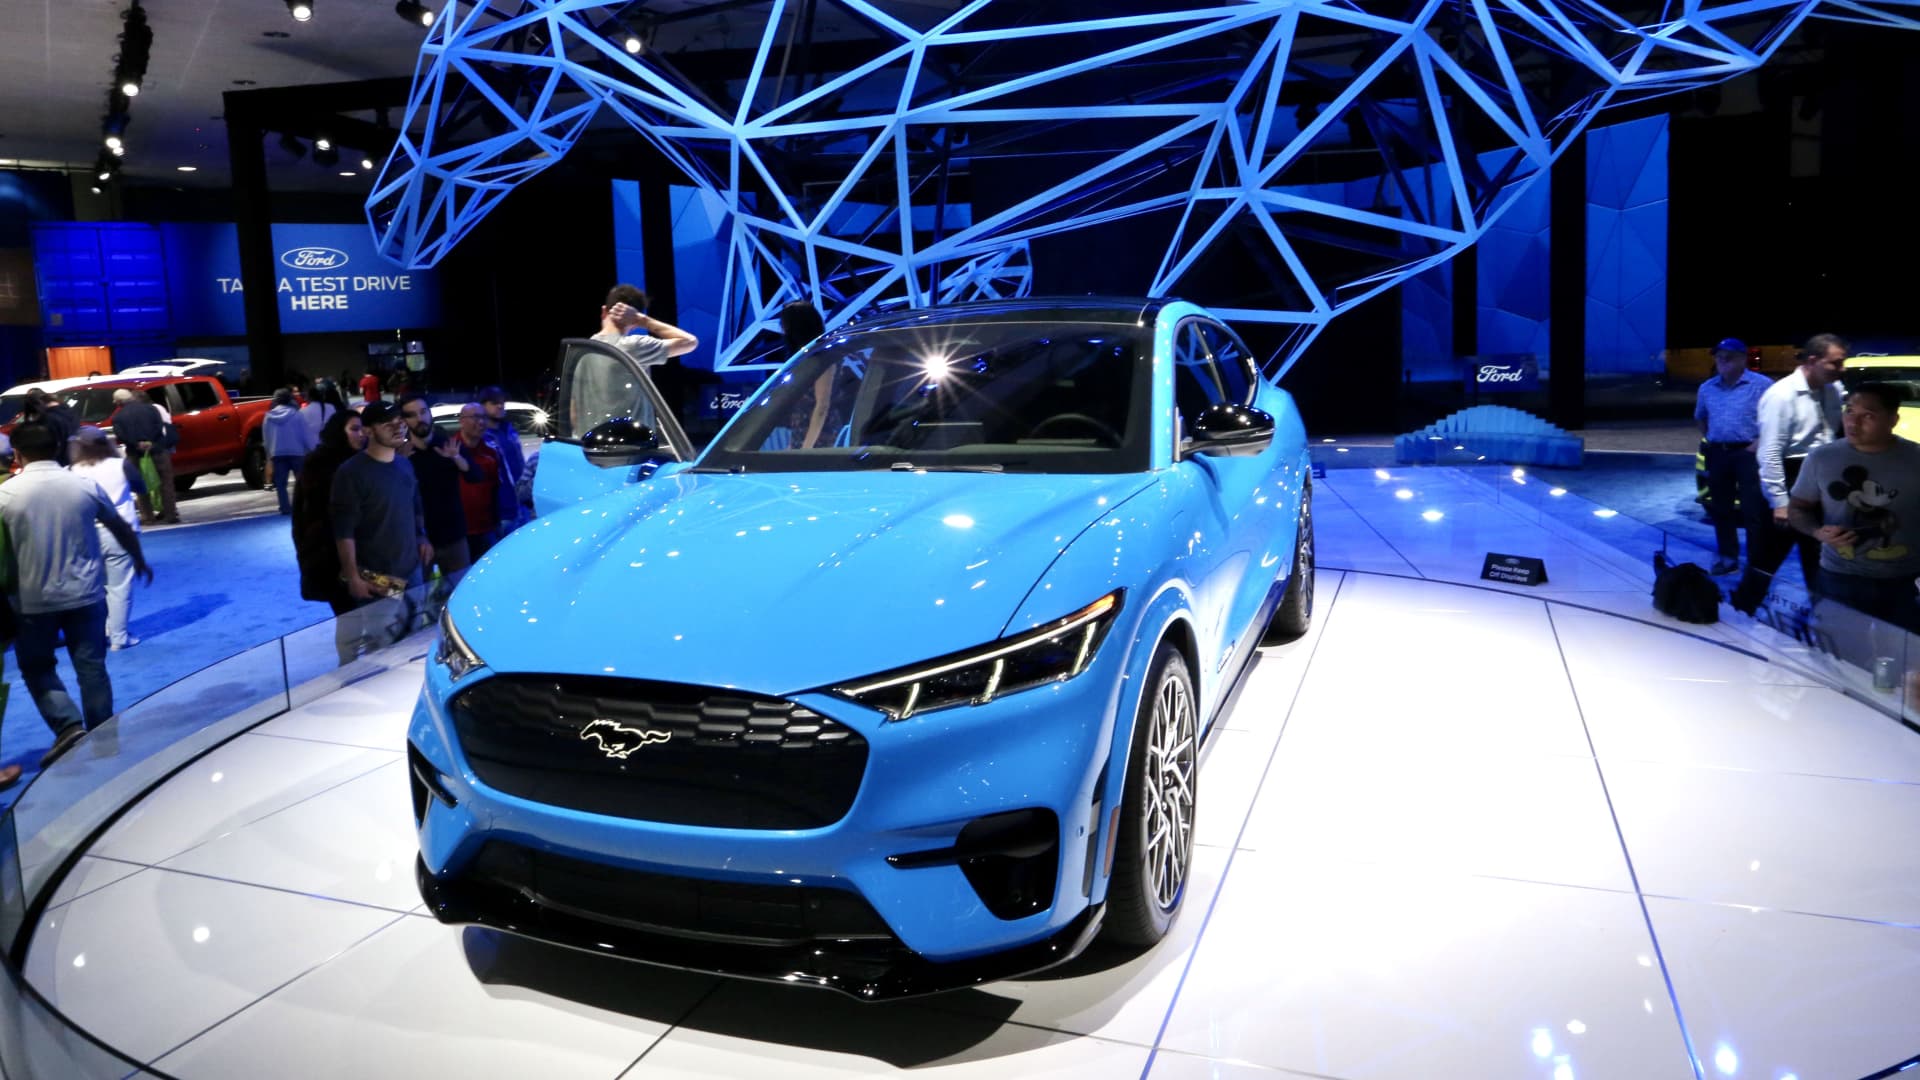 People visit Ford's all-electric SUV Mustang Mach-E at the 2019 Los Angeles Auto Show in Los Angeles, the United States, Nov. 22, 2019.